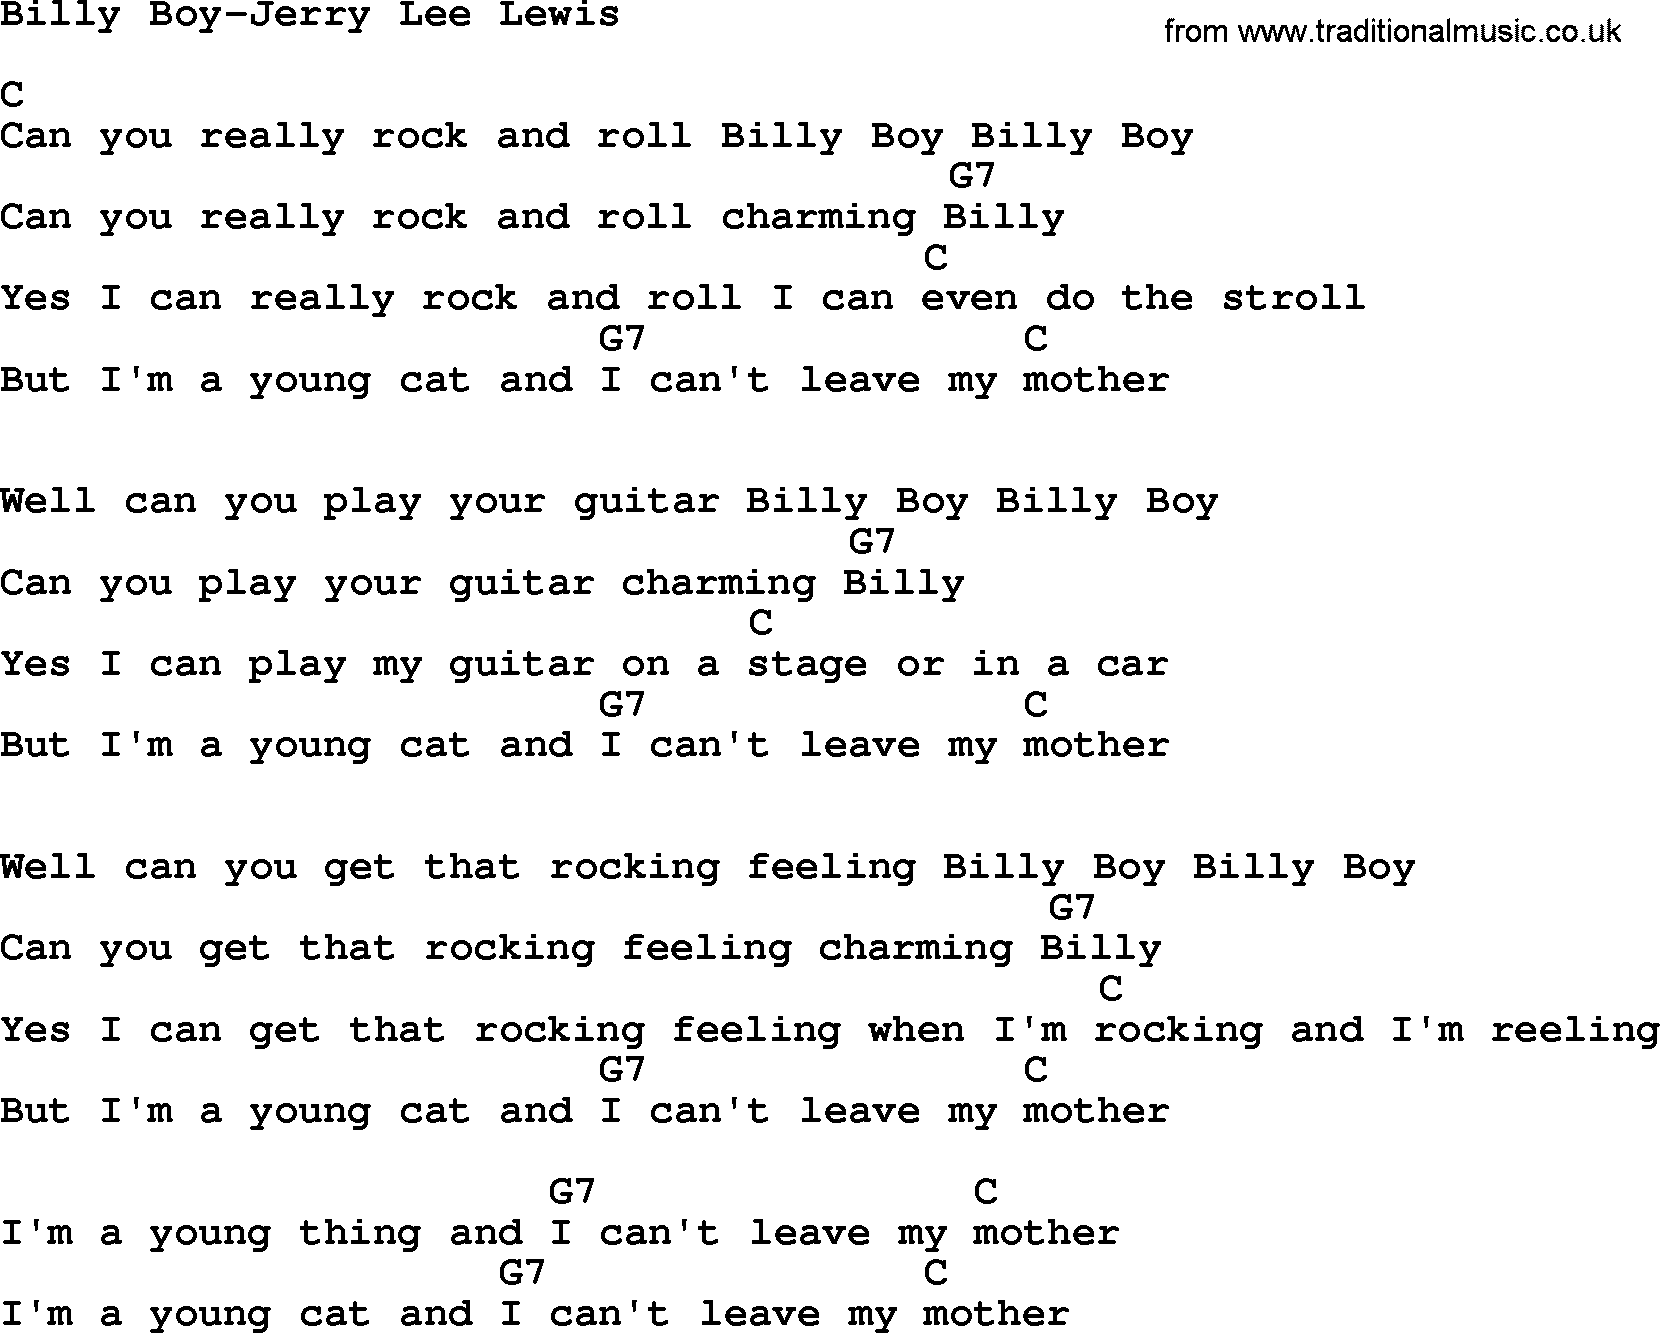 Country music song: Billy Boy-Jerry Lee Lewis lyrics and chords